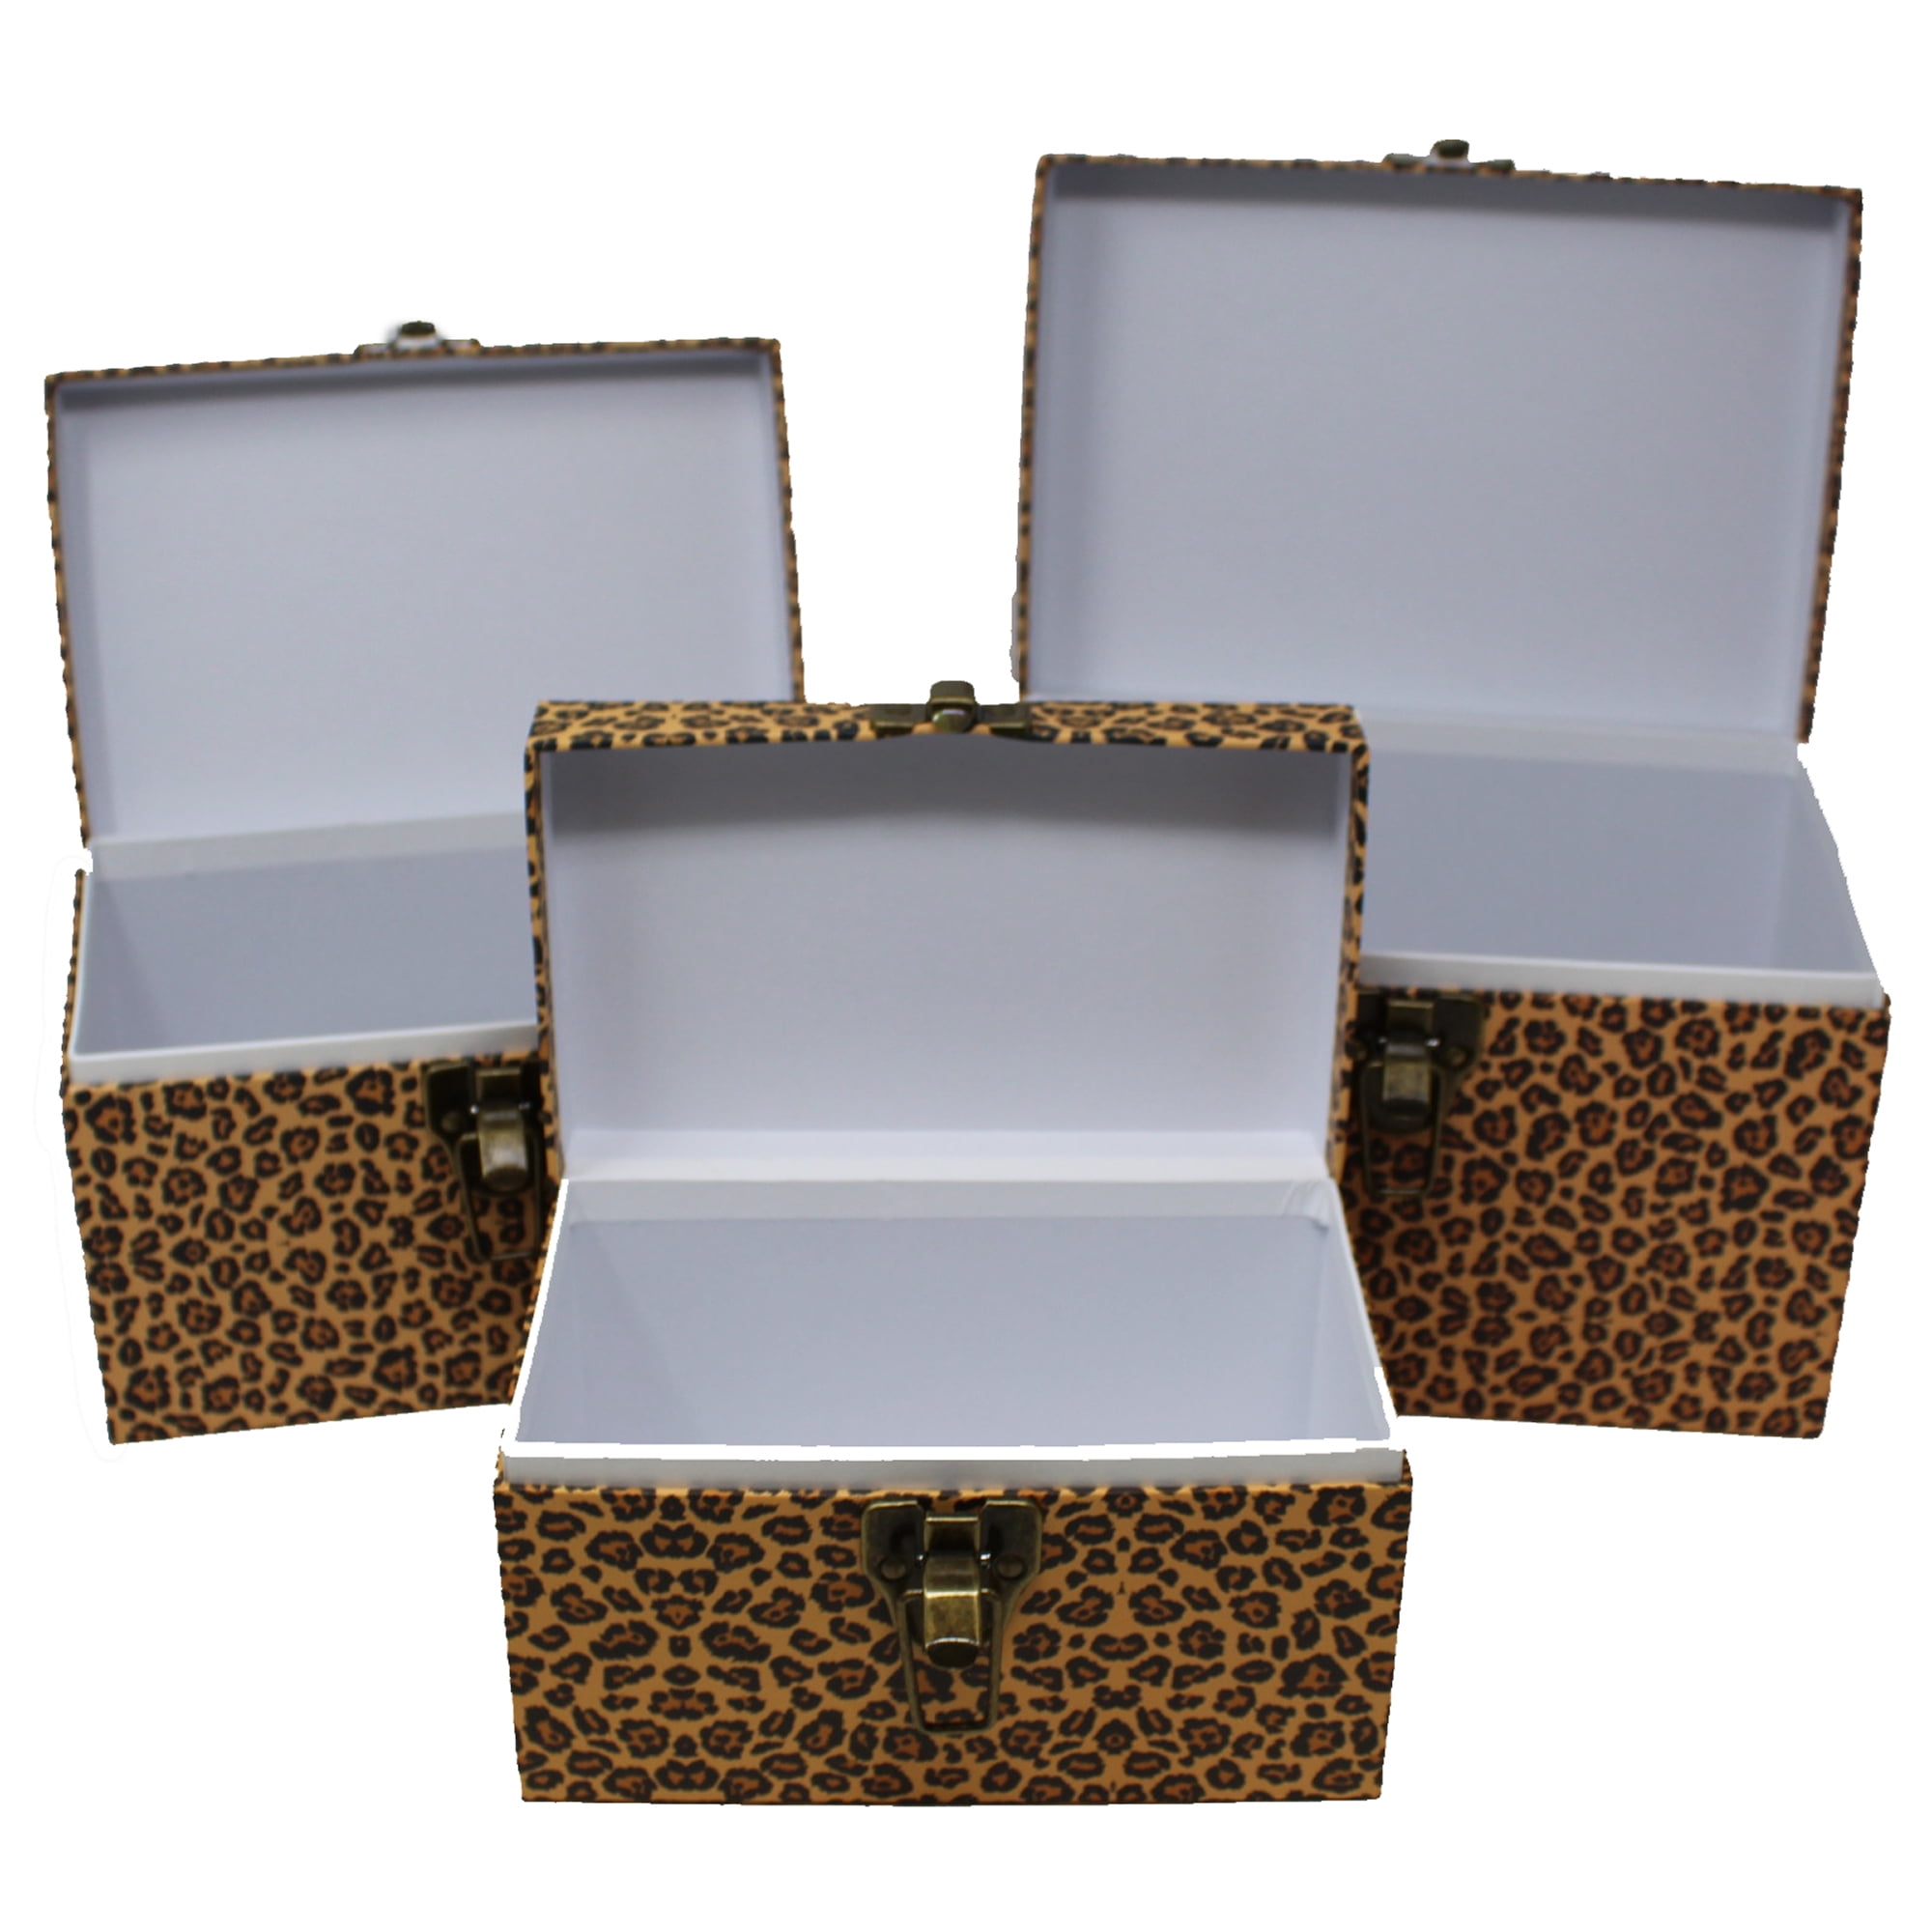 Leopard Print Chests - 3 Sizes (3 Pack)